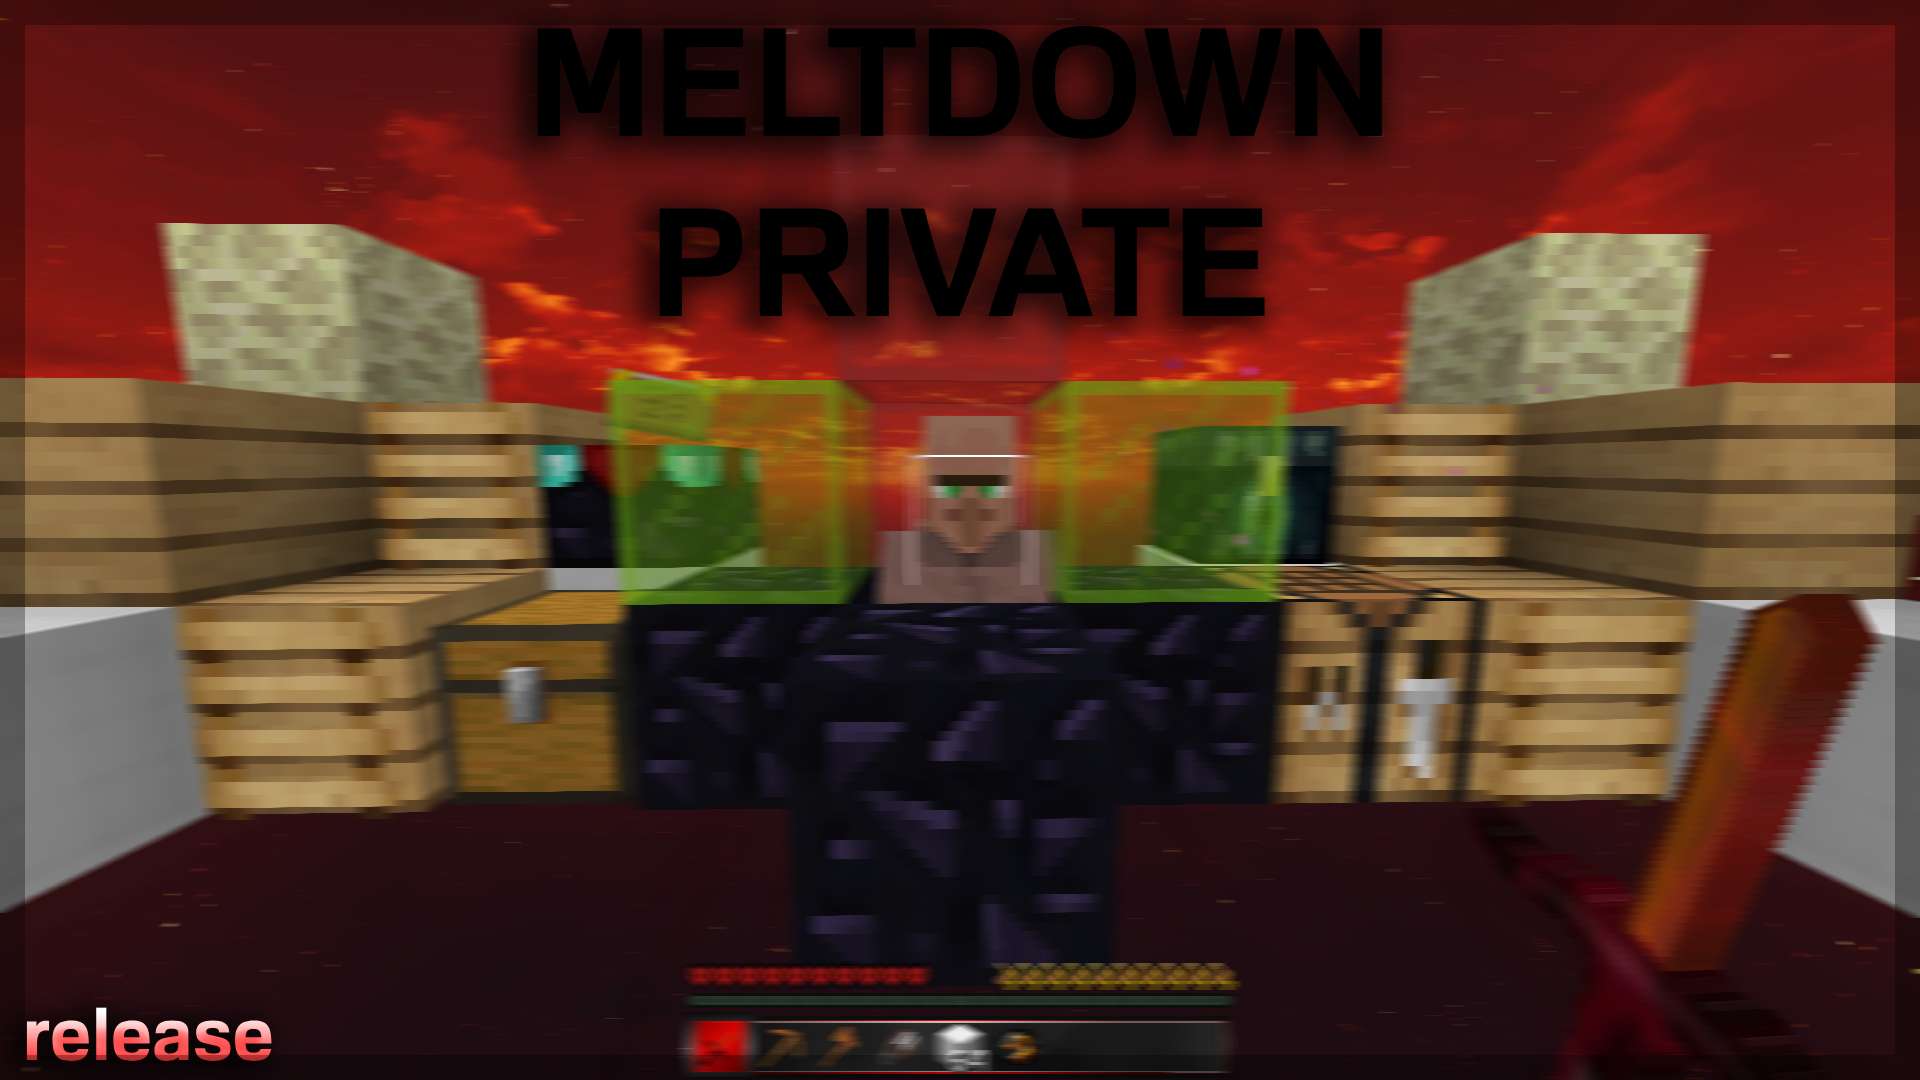 MELTDOWN PRIVATE 16x by kinryne on PvPRP